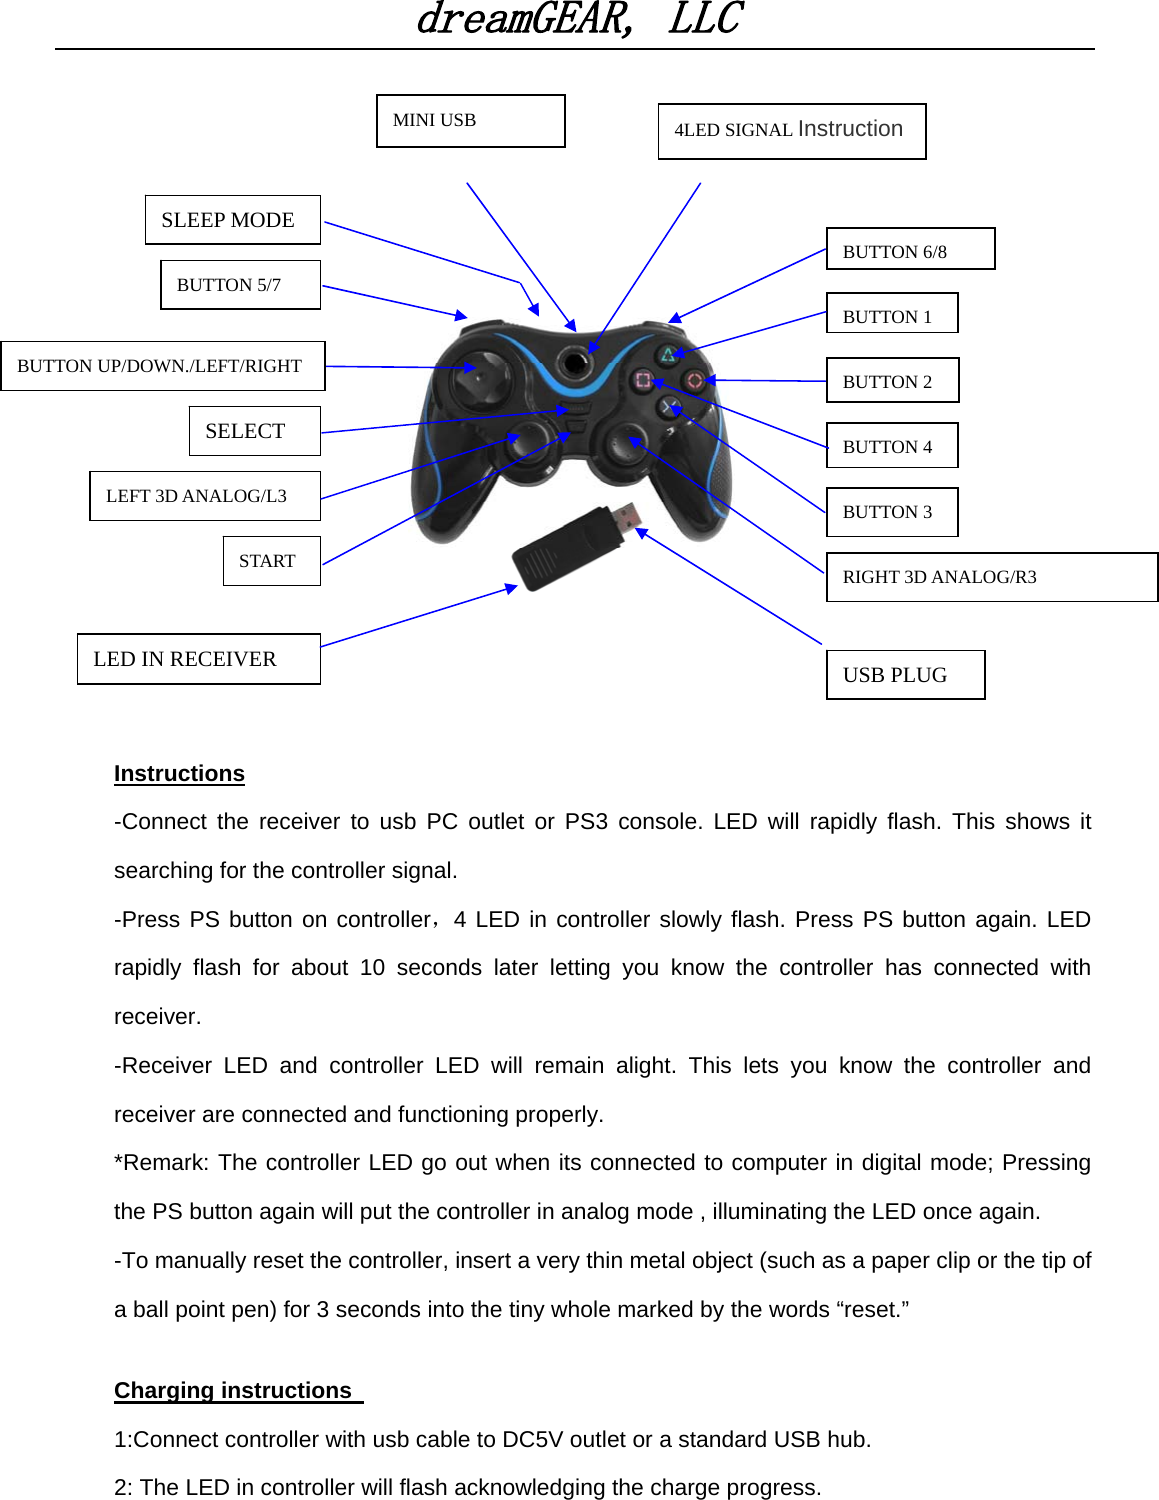 dreamGEAR, LLC       ··      Instructions -Connect the receiver to usb PC outlet or PS3 console. LED will rapidly flash. This shows it searching for the controller signal. -Press PS button on controller，4 LED in controller slowly flash. Press PS button again. LED rapidly flash for about 10 seconds later letting you know the controller has connected with receiver.  -Receiver LED and controller LED will remain alight. This lets you know the controller and receiver are connected and functioning properly. *Remark: The controller LED go out when its connected to computer in digital mode; Pressing the PS button again will put the controller in analog mode , illuminating the LED once again. -To manually reset the controller, insert a very thin metal object (such as a paper clip or the tip of a ball point pen) for 3 seconds into the tiny whole marked by the words “reset.”  Charging instructions   1:Connect controller with usb cable to DC5V outlet or a standard USB hub. 2: The LED in controller will flash acknowledging the charge progress. BUTTON 6/8 BUTTON 3 BUTTON 1 BUTTON 2 BUTTON 4 RIGHT 3D ANALOG/R3 START BUTTON UP/DOWN./LEFT/RIGHT SELECT LEFT 3D ANALOG/L3 BUTTON 5/7 4LED SIGNAL Instruction MINI USB LED IN RECEIVER SLEEP MODE USB PLUG 